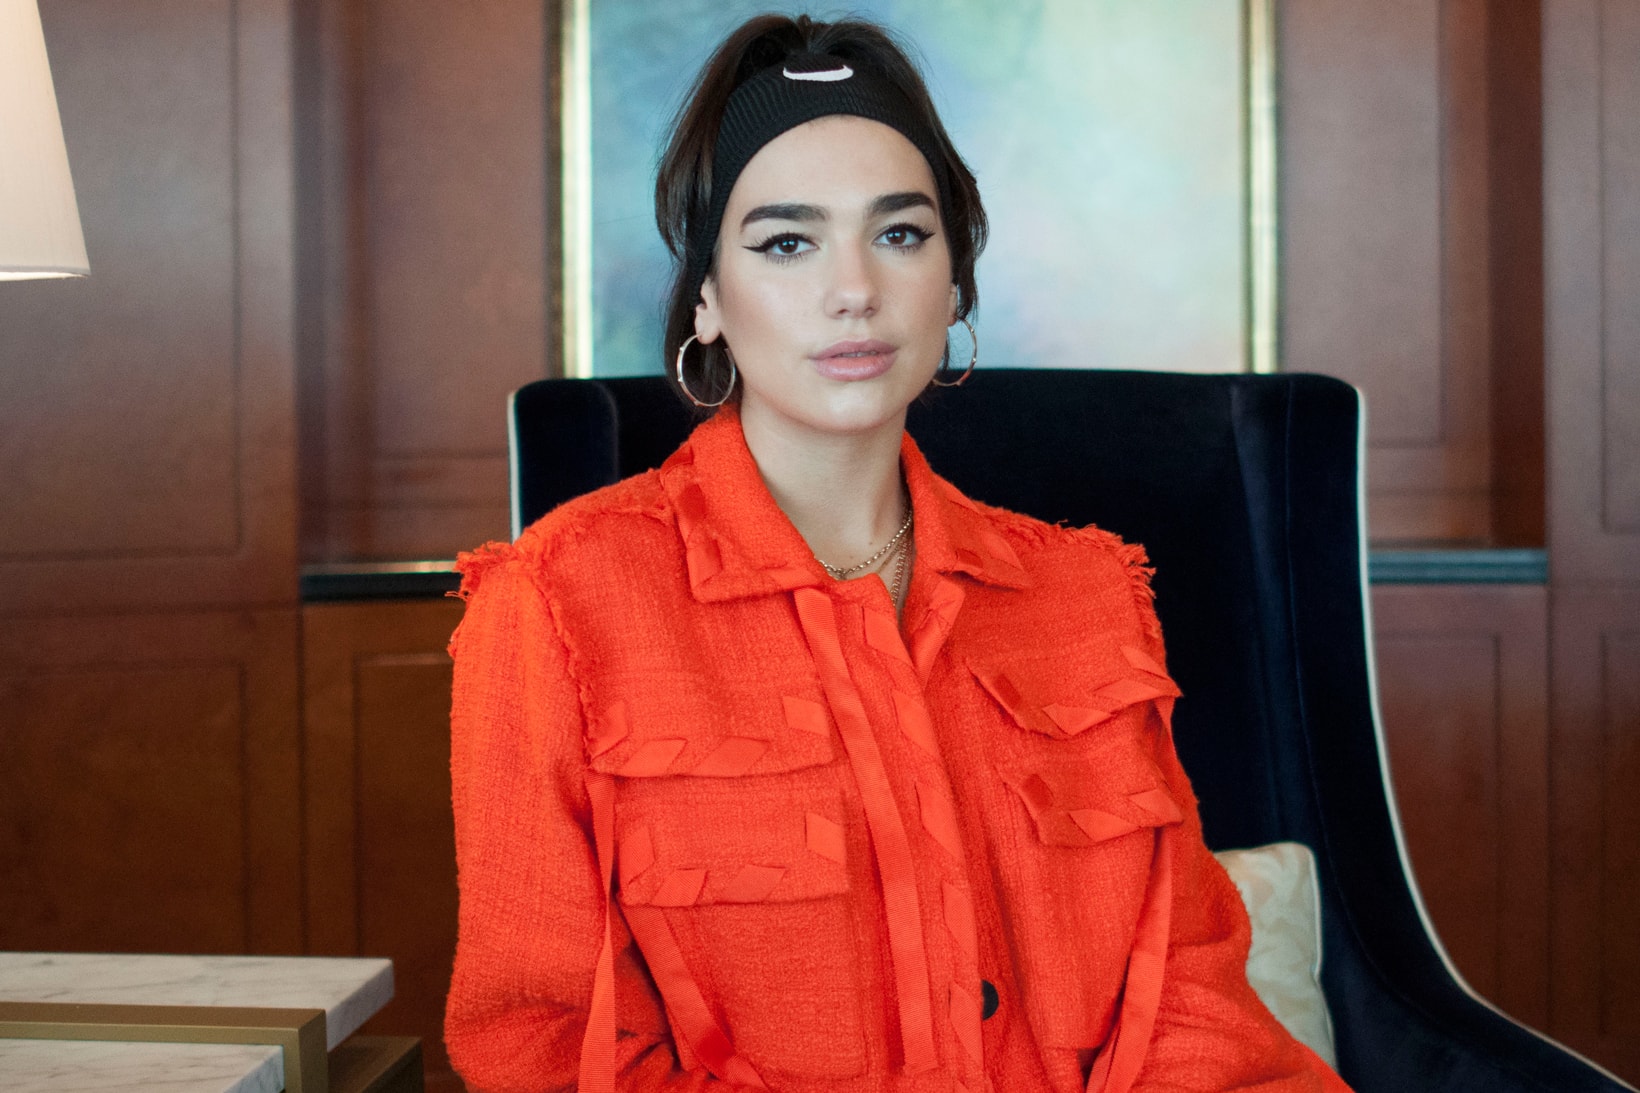 Dua Lipa on Career, Music and Her Upcoming Album Interview Fashion Advice Frank Ocean IDGAF Hotter than Hell Tour One Kiss Calvin Harris Collaboration Music Musician